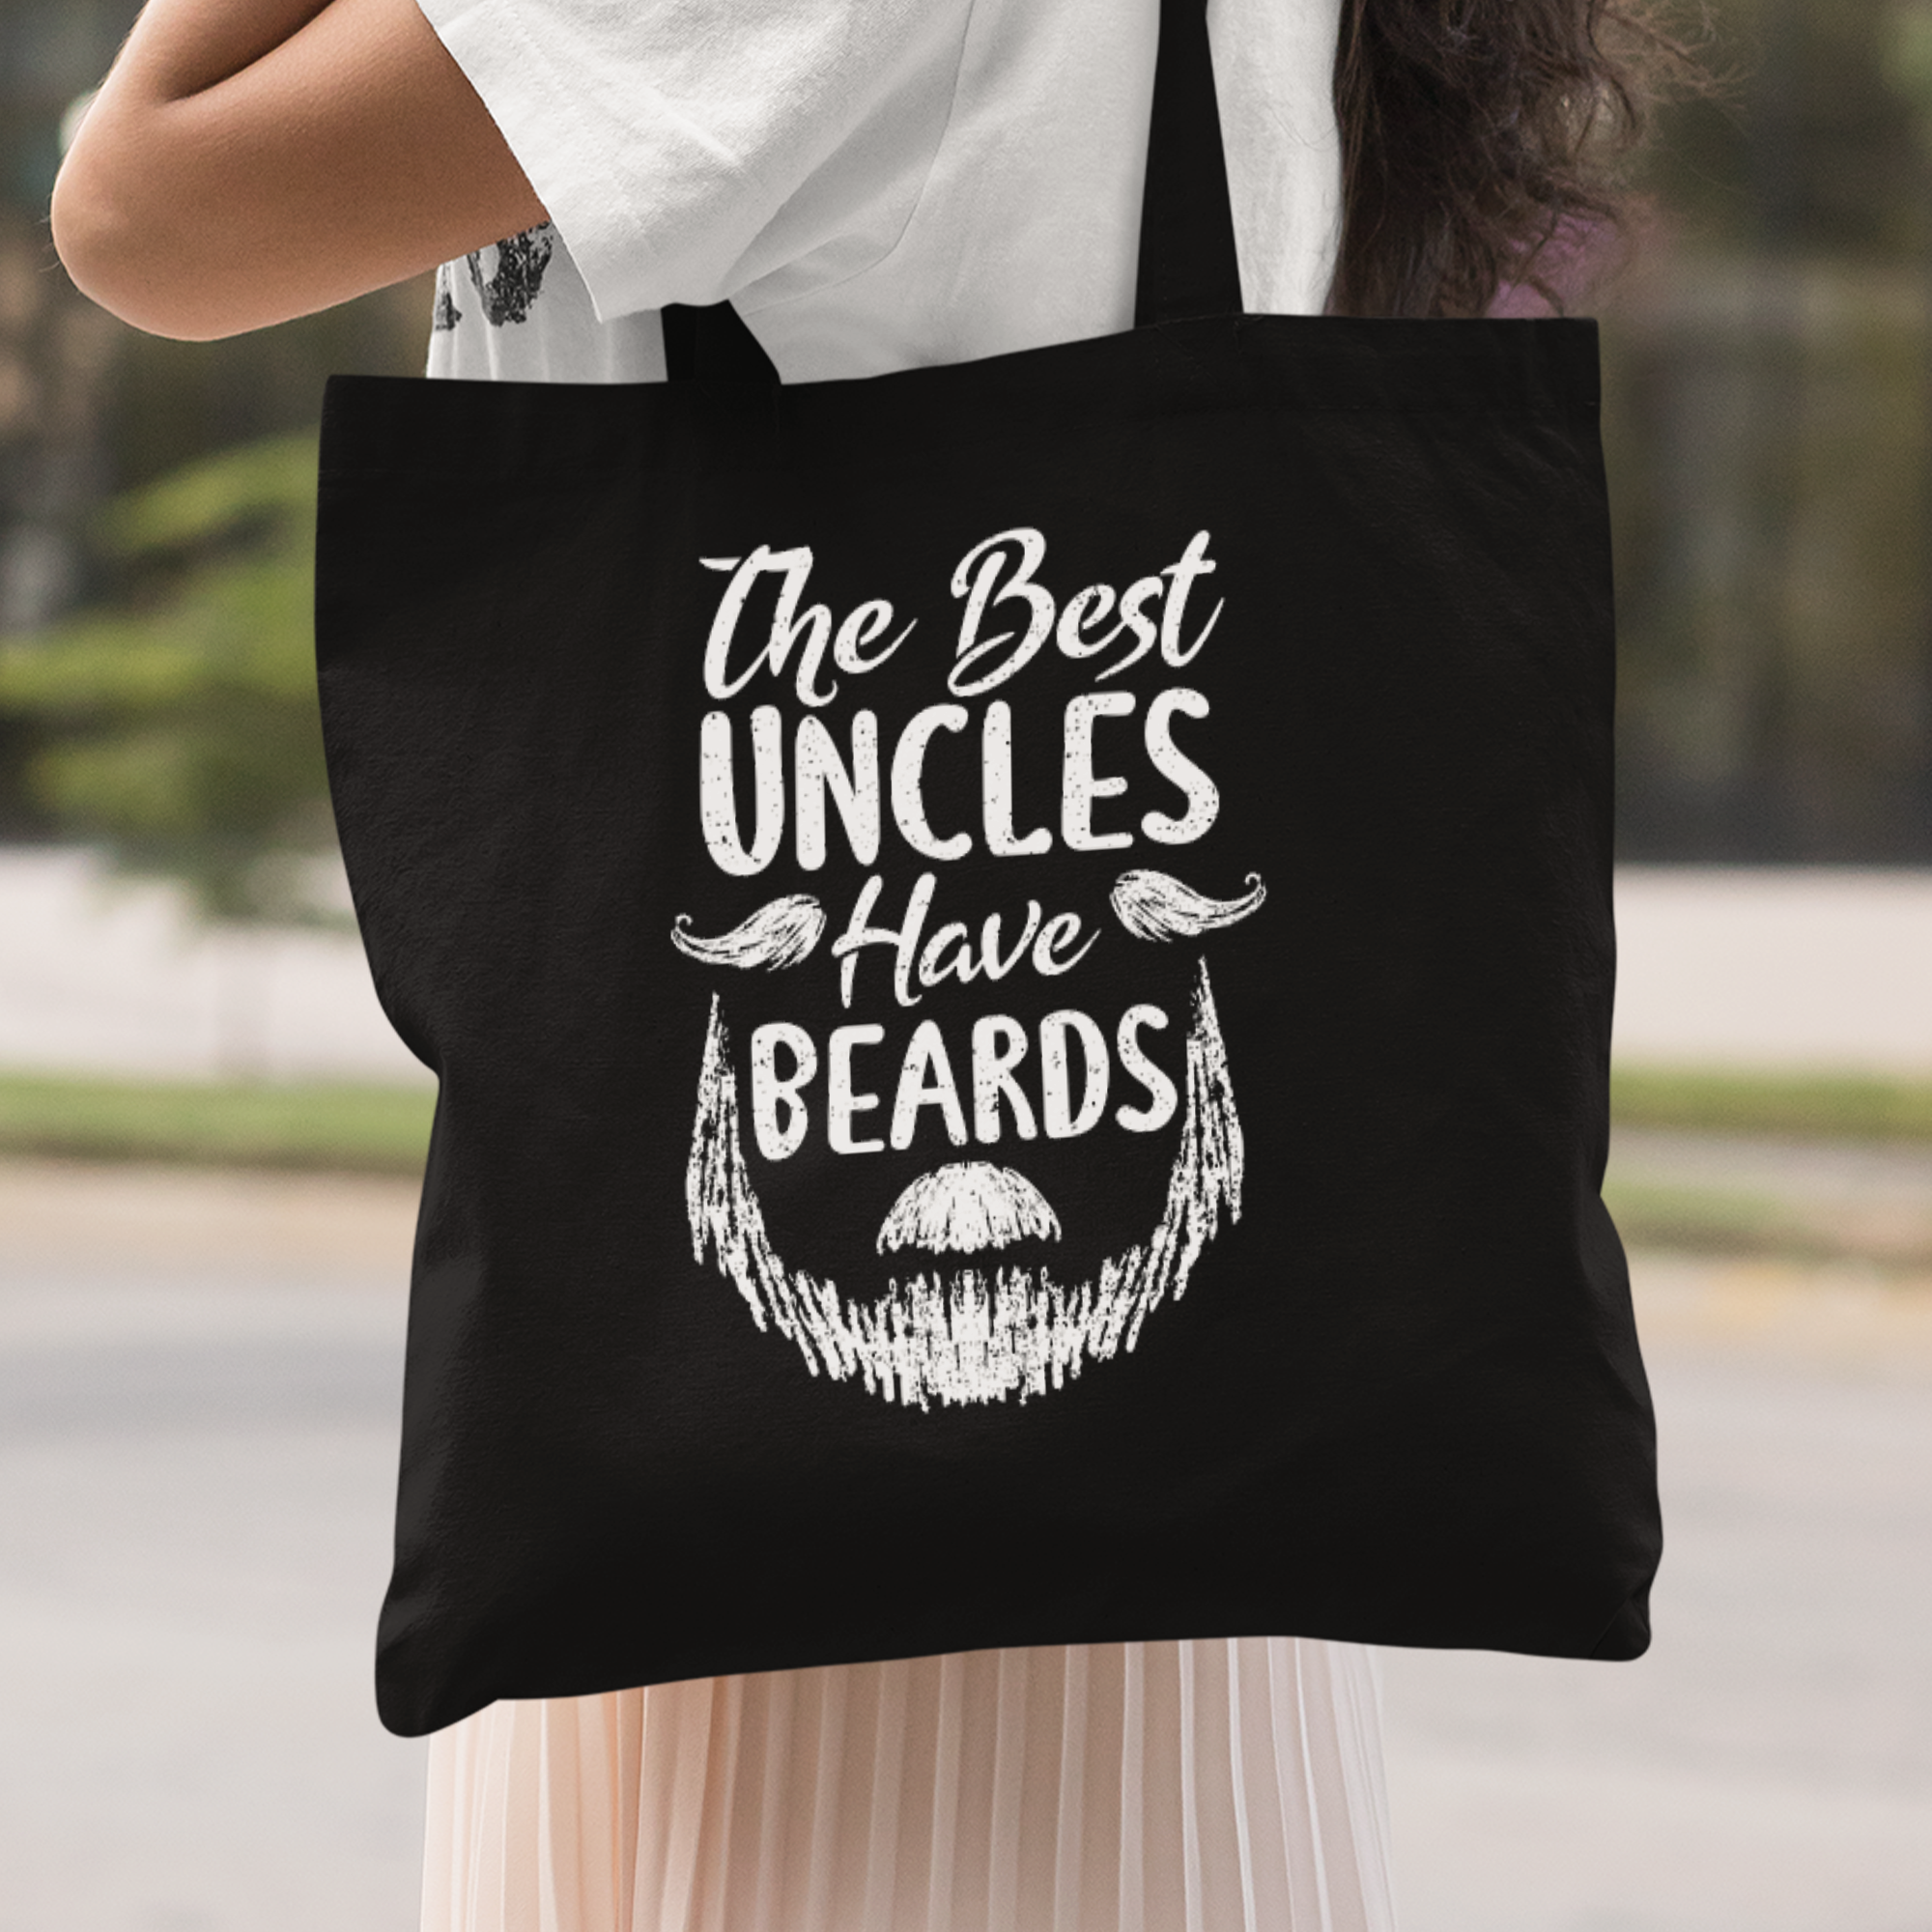 The Best Uncles Have Beards Stoffbeutel - DESIGNSBYJNK5.COM